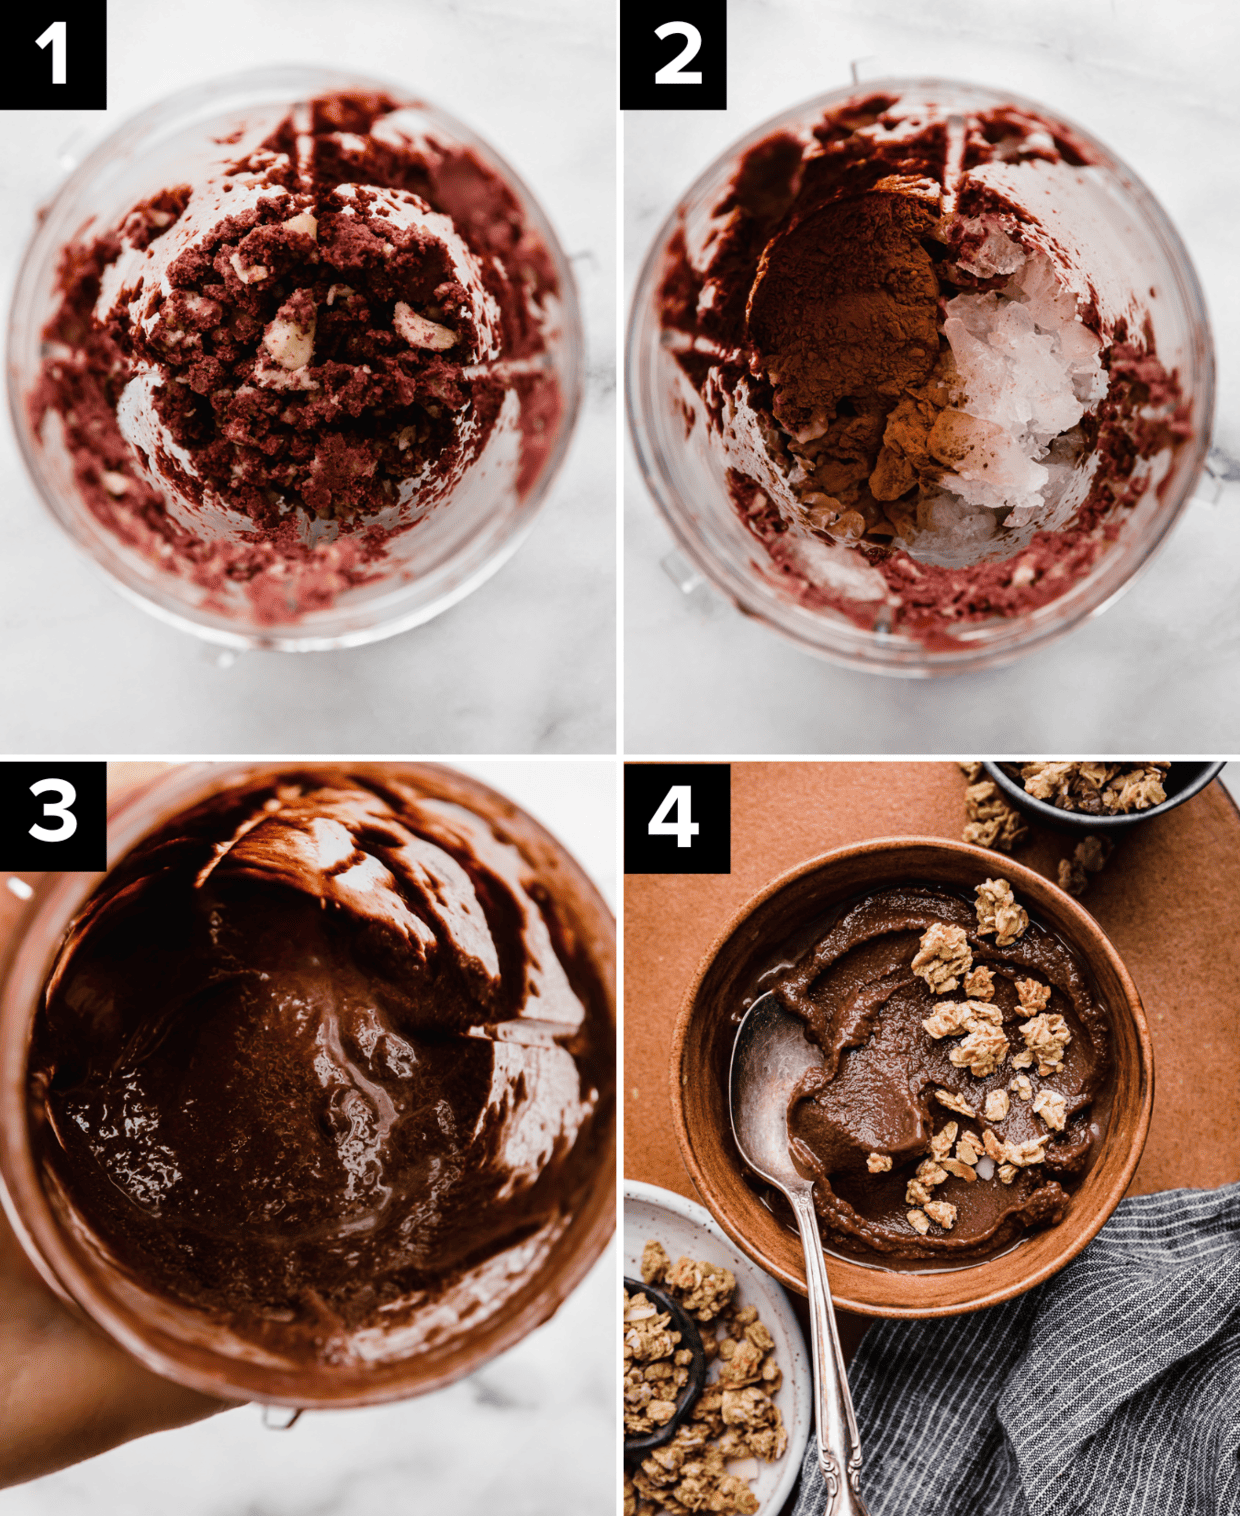 Four photos showing the making of a chocolate Chocolate Acai smoothie in a blender cup using chocolate protein powder, ice, banana, and Sambazon açaí packet.